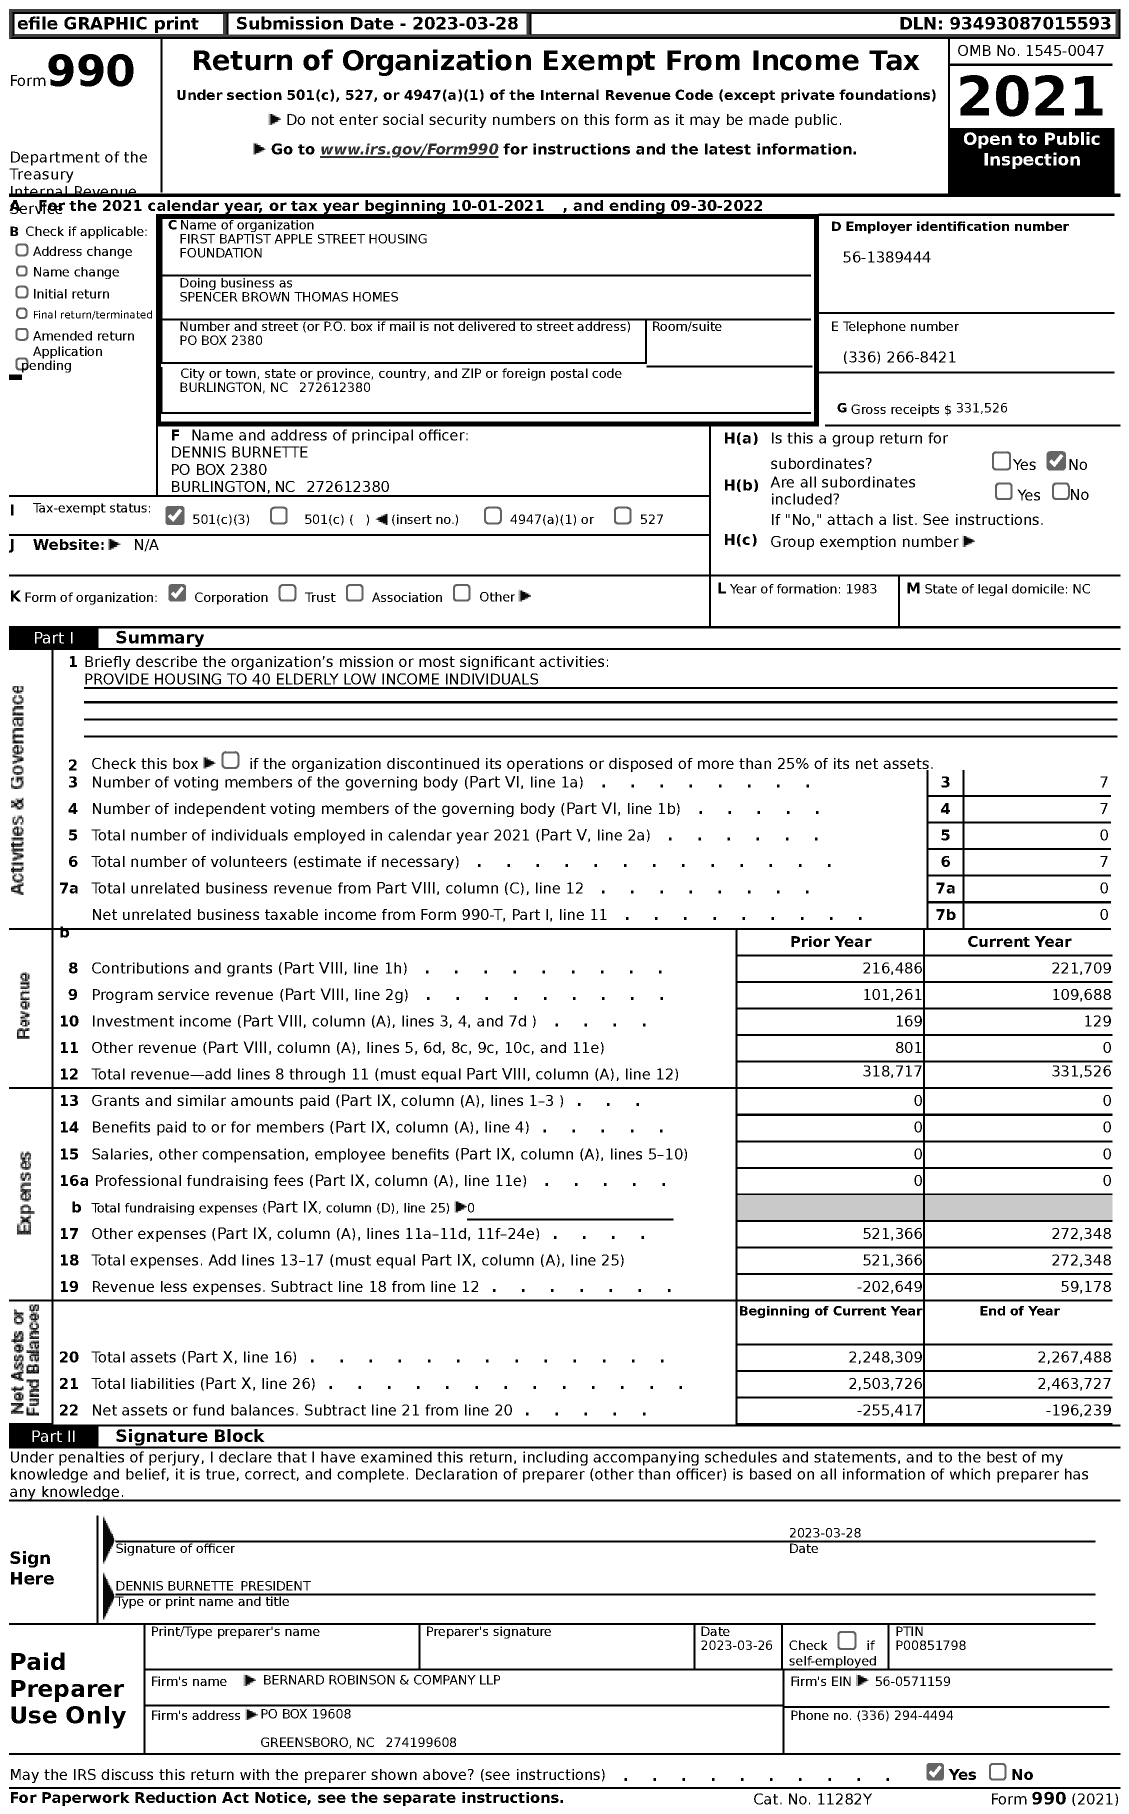 Image of first page of 2021 Form 990 for Spencer Brown Thomas Homes